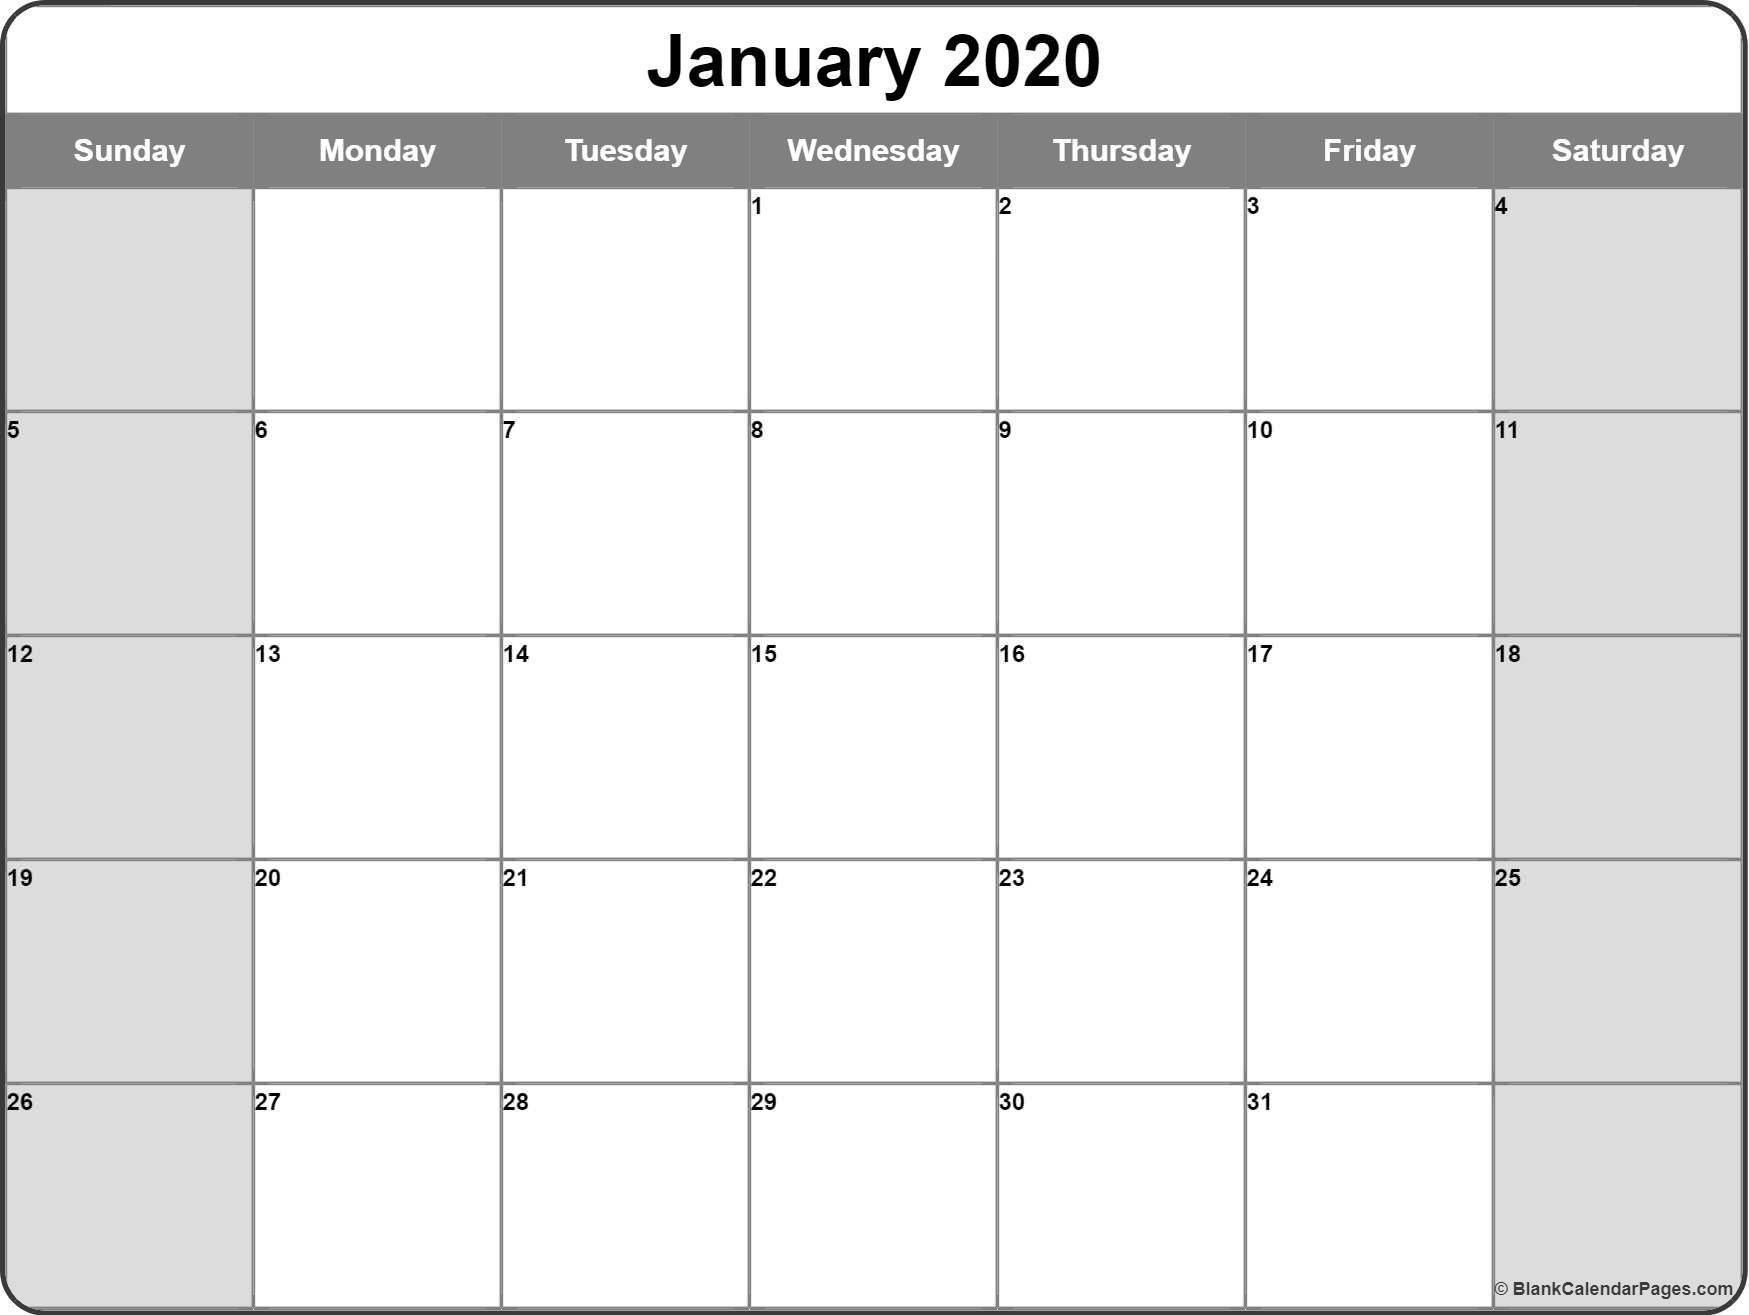 January 2020 Calendar | Free Printable Monthly Calendars Monthly Calendar 2020 Without Weekends